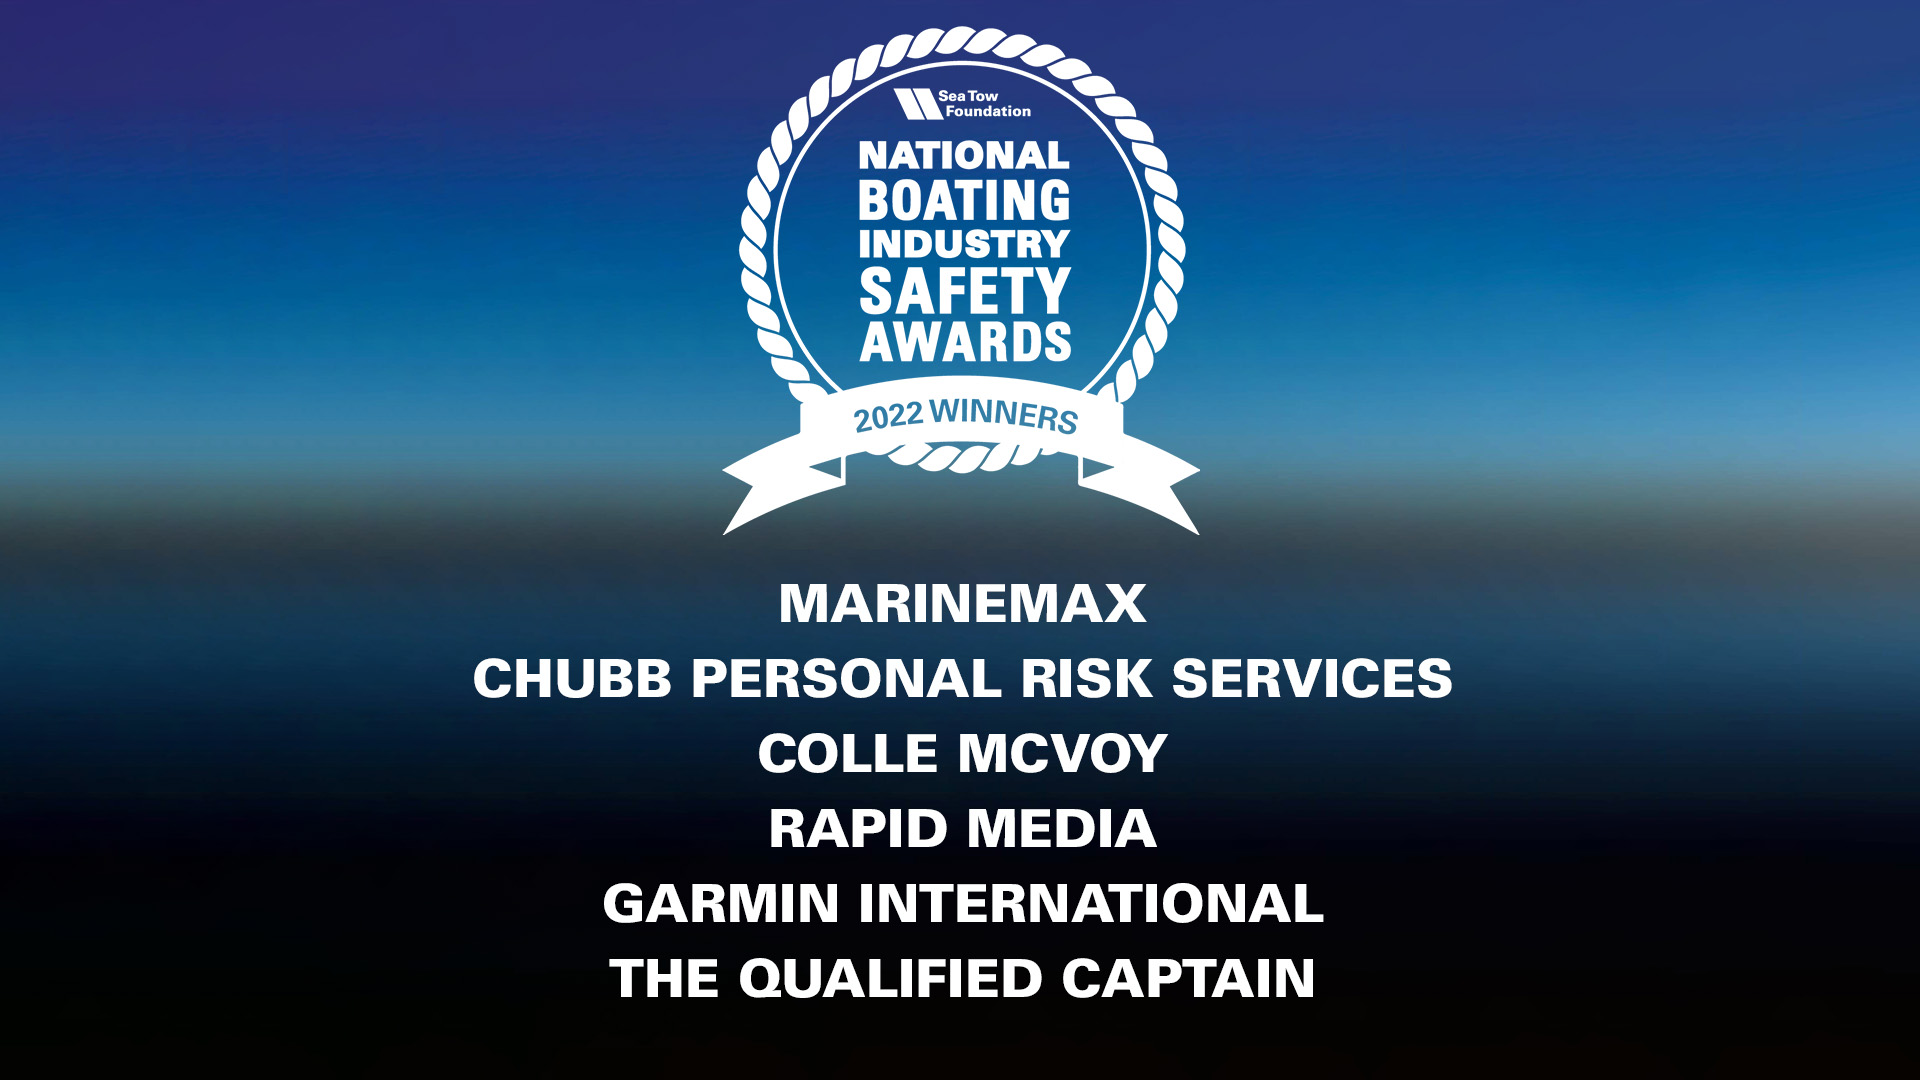 Winners of 2022 National Boating Industry Safety Awards